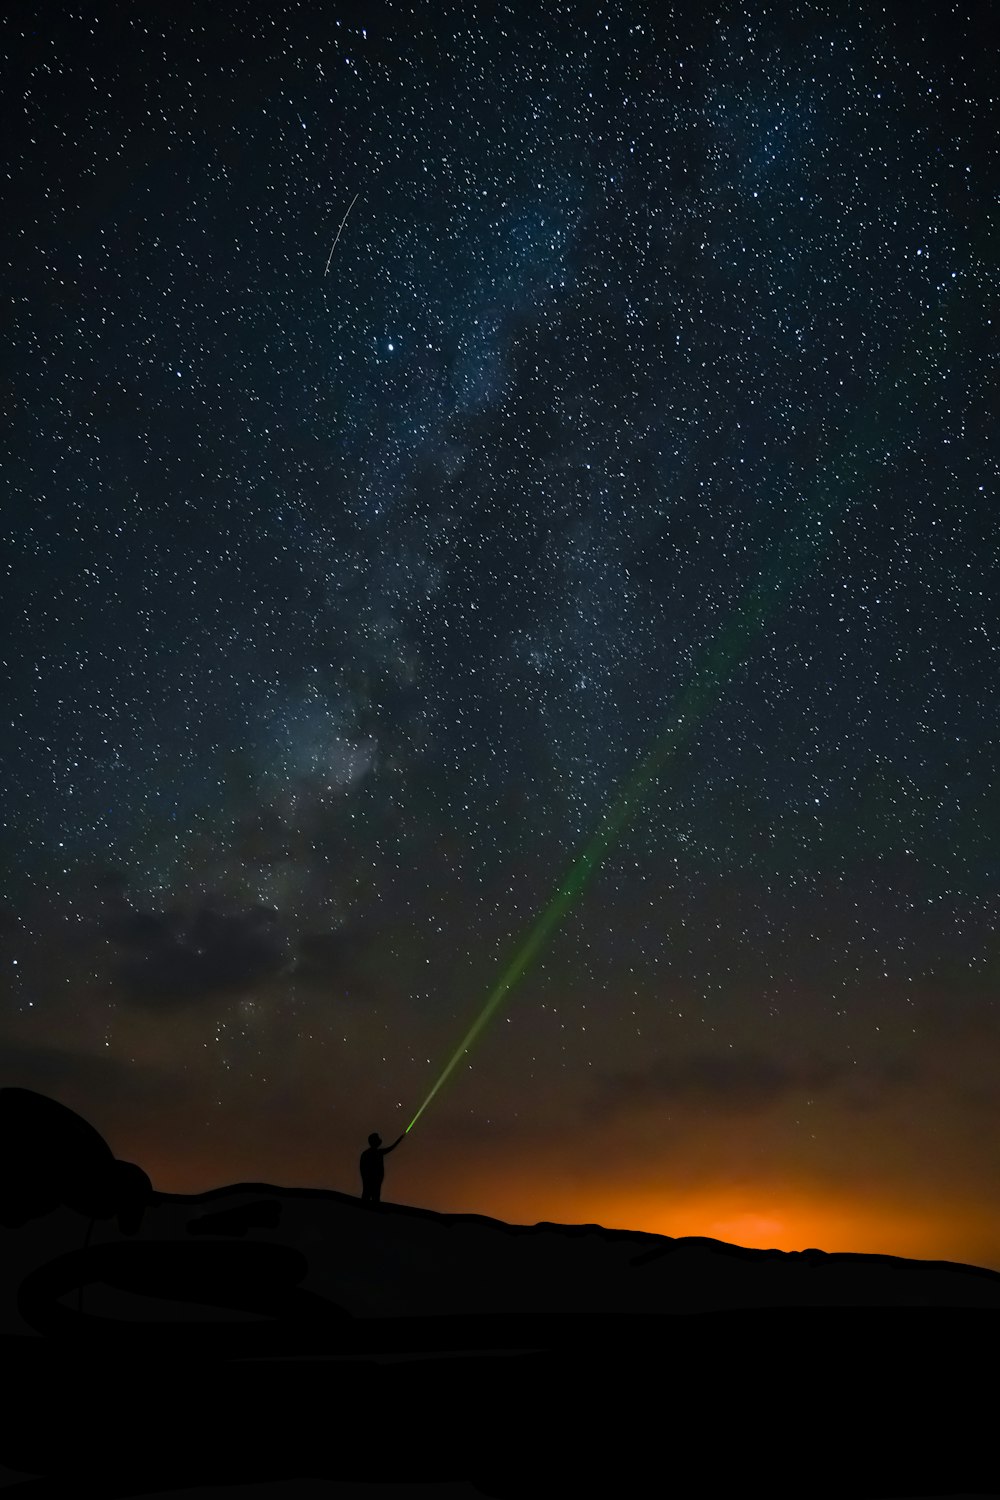 silhouette of man standing on rock under starry night